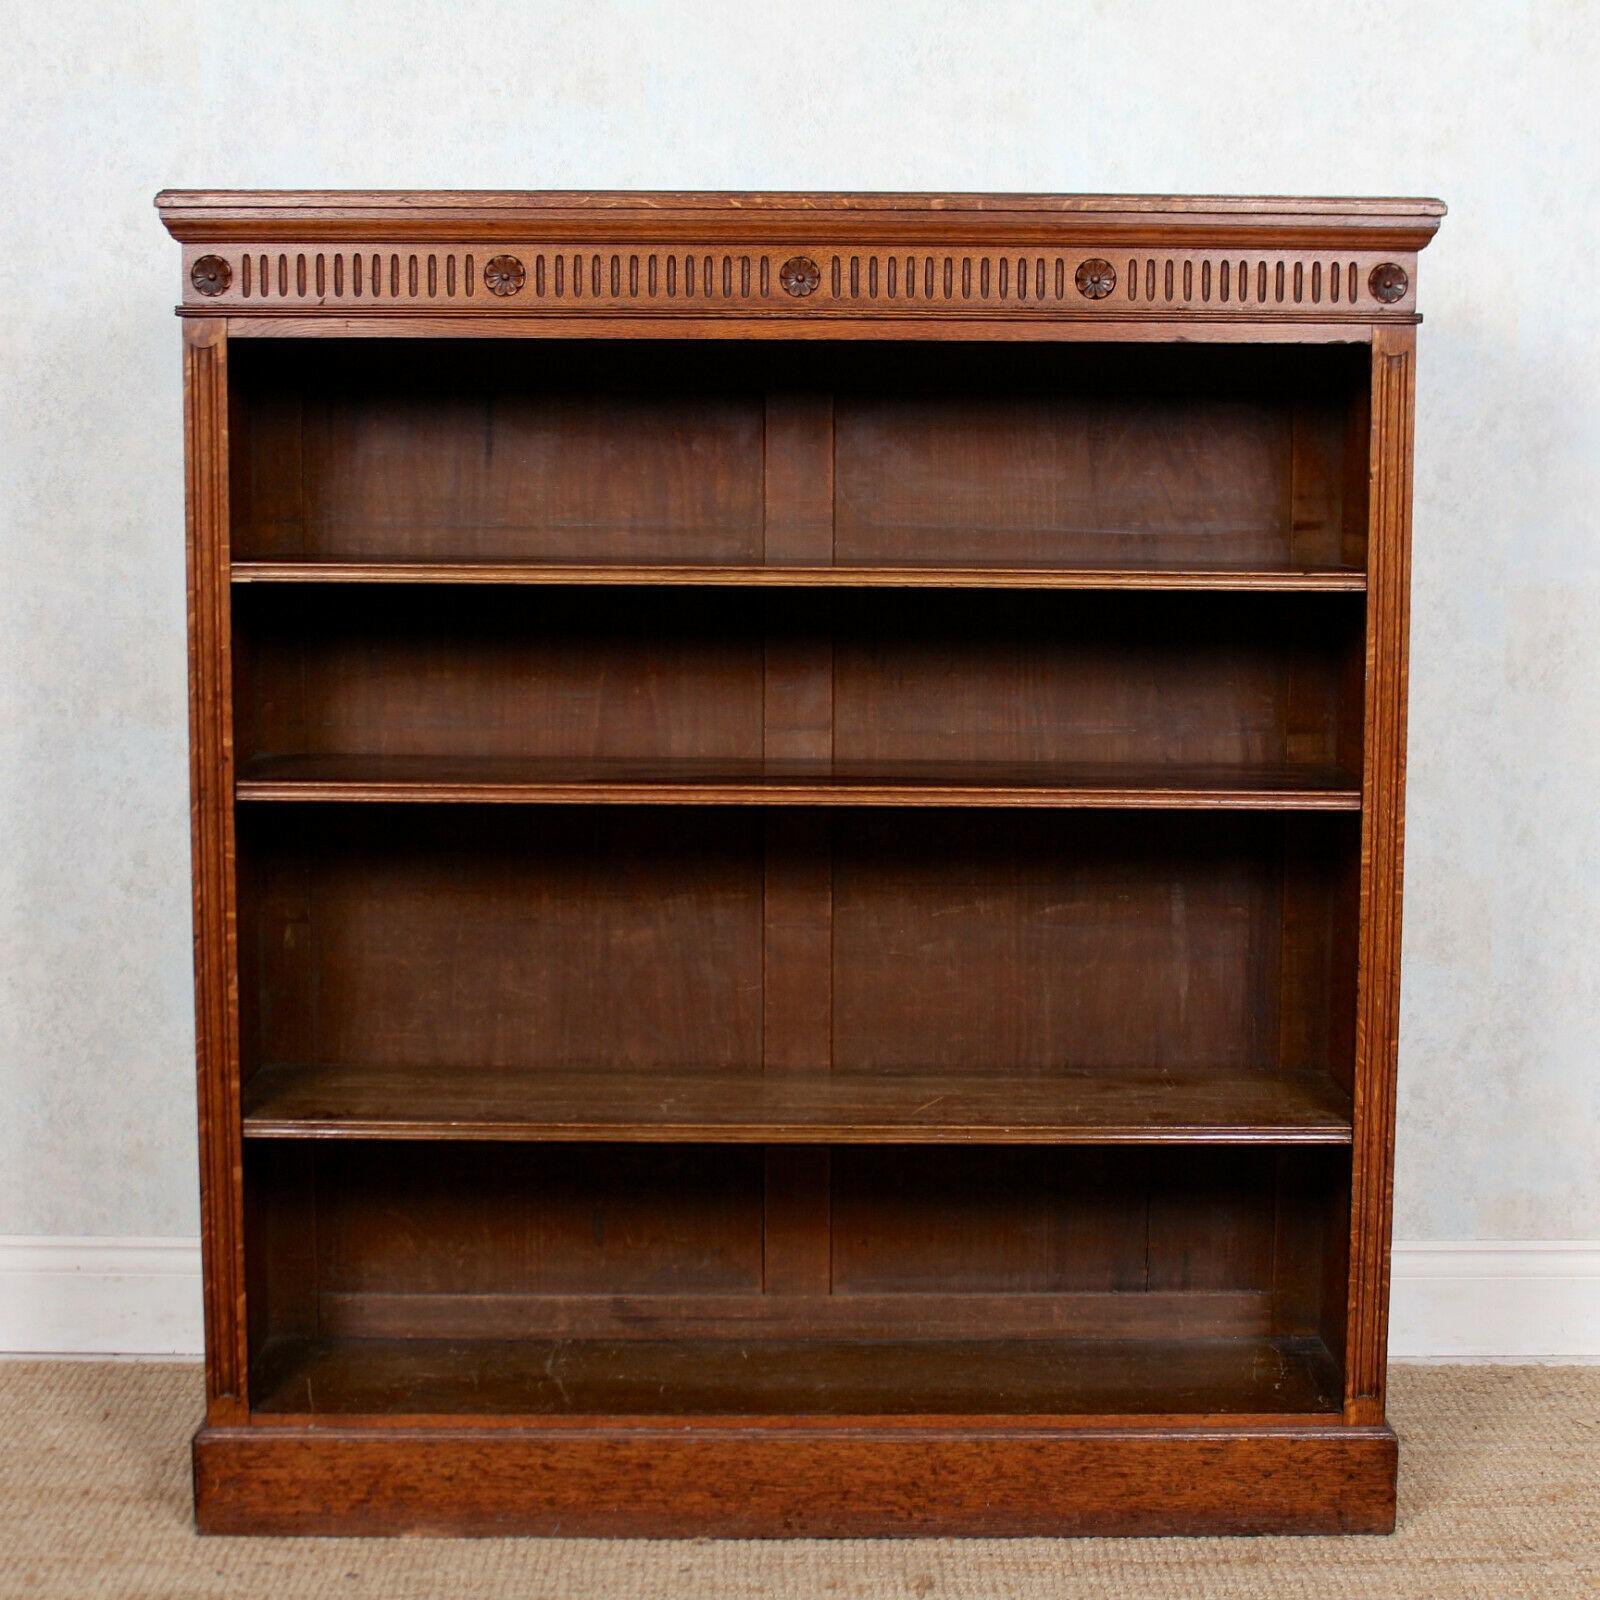 An impressive Edwardian open bookcase.
Constructed from solid oak boasting a well figured wild golden grain and rich patina.
The carved flowerhead and reeded frieze above adjustable shelving flanked by carved reeded columns and raised on a plinth